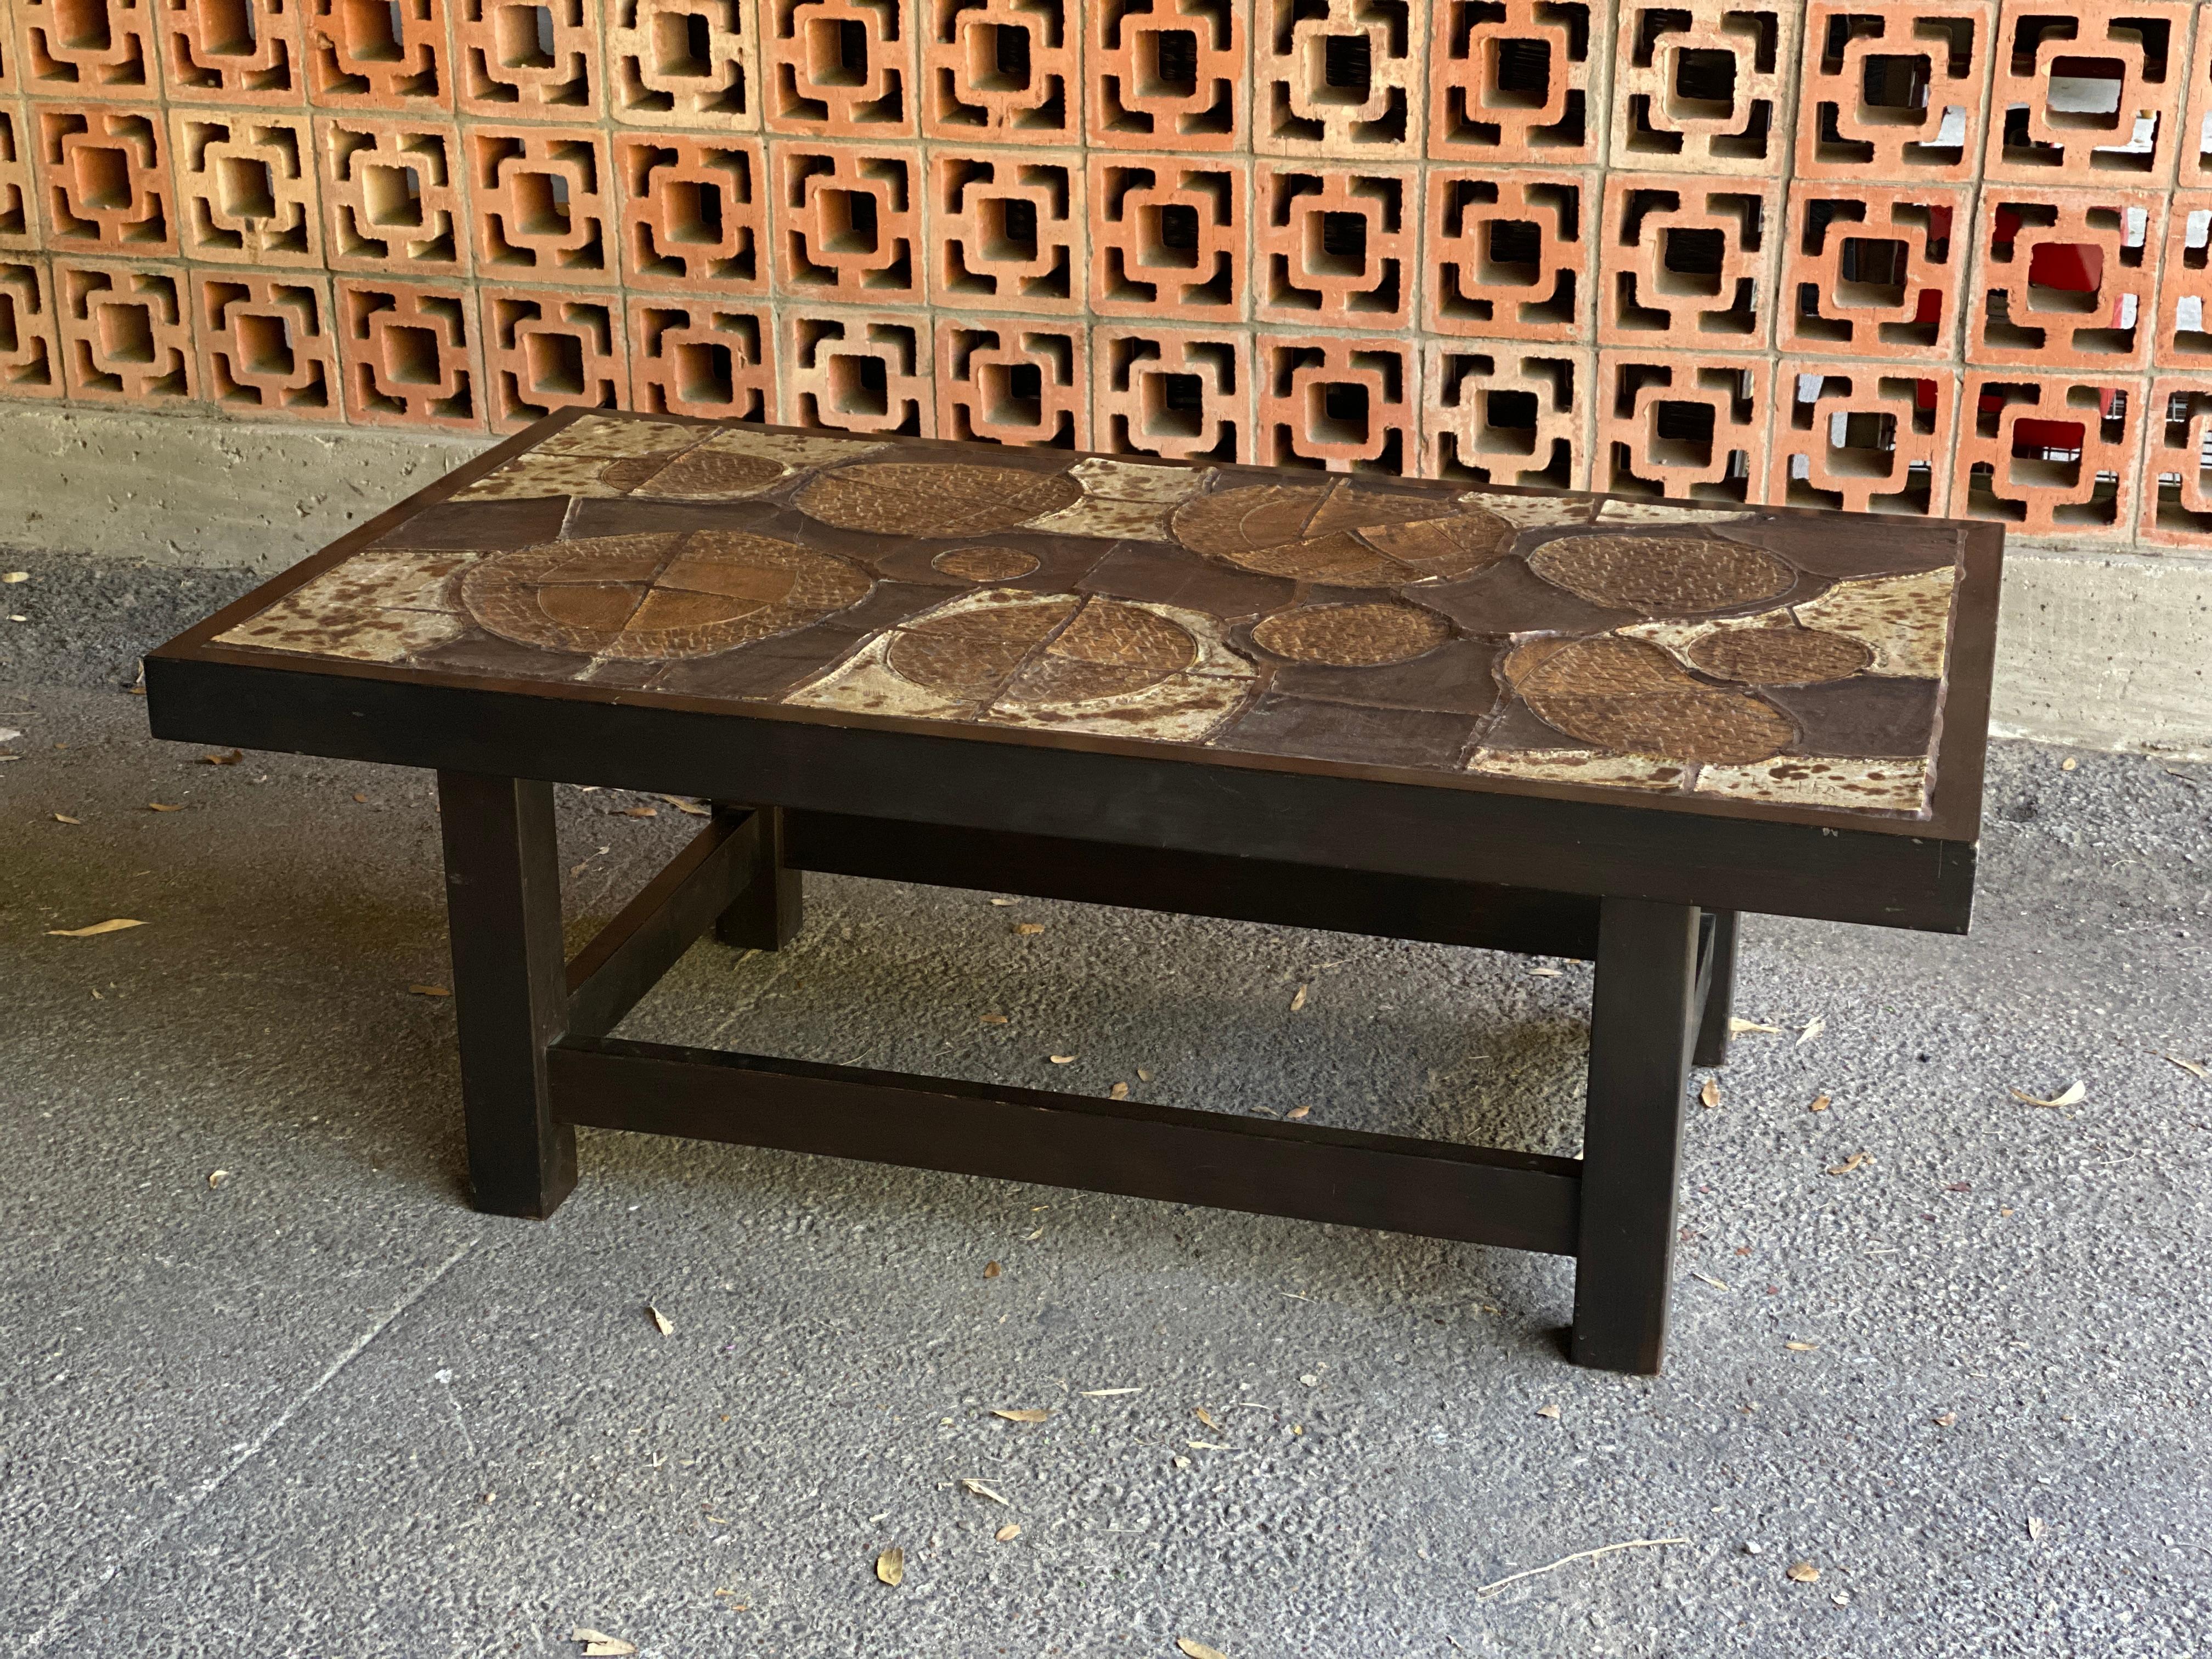 Mid-Century Modern rectangular cocktail table in the Brutalist style with rustic ceramic tile top and wood base (probably stained oak). Matching circular table also available. Signed. Belgium, 1960-70's.